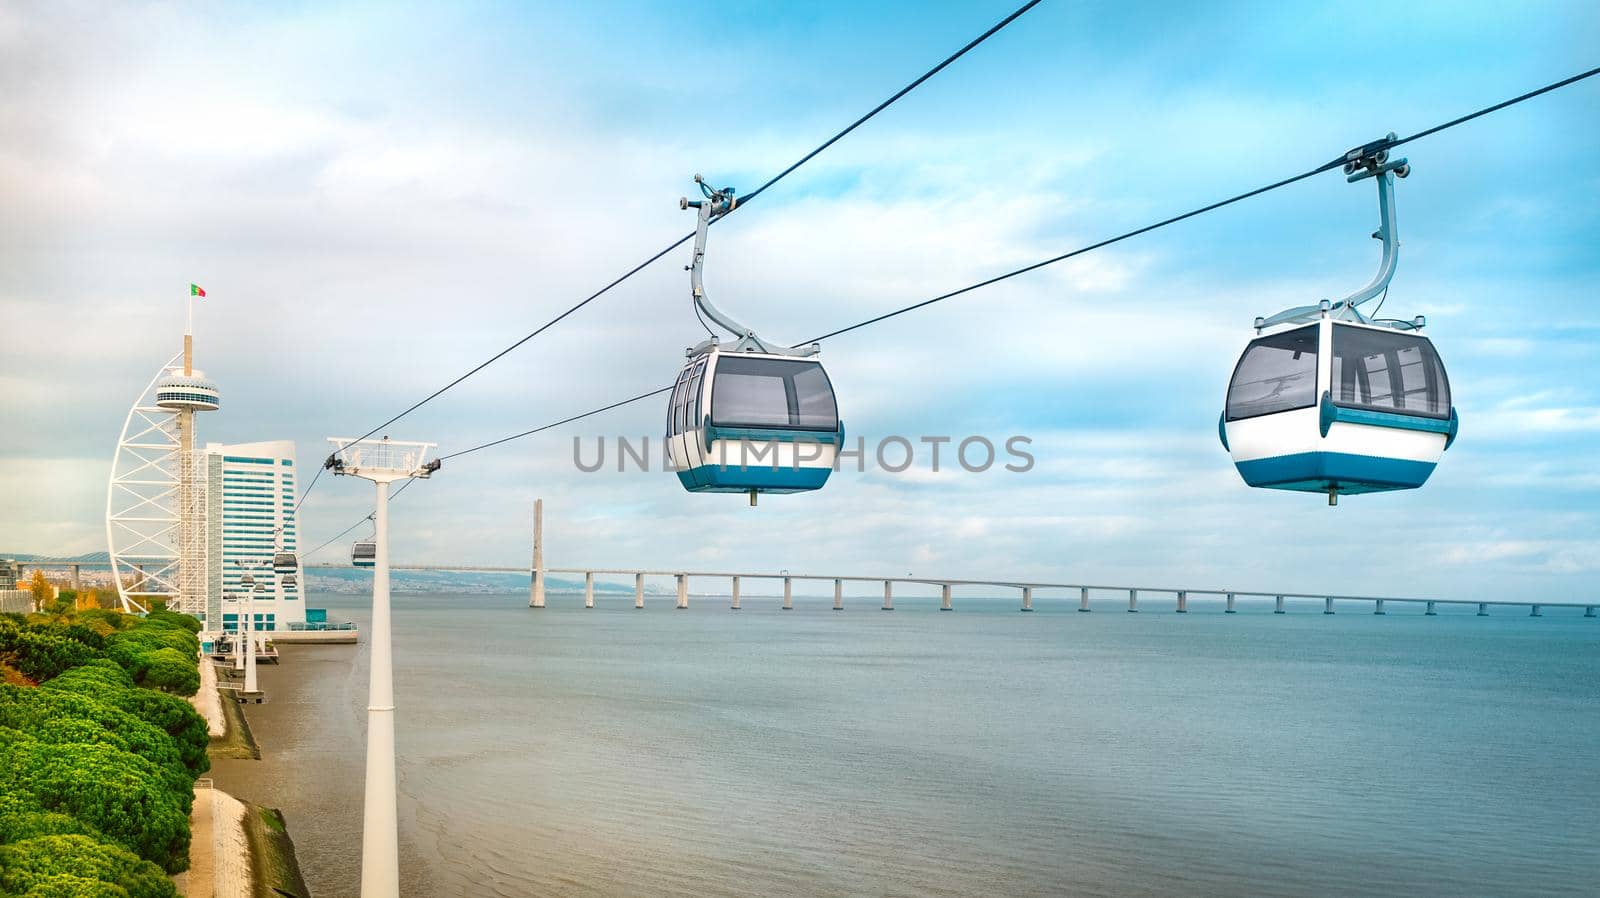 Aerial photo of cable car and Vasco da Gama tower. Sightseeing in Lisbon, Portugal. by DariaKulkova